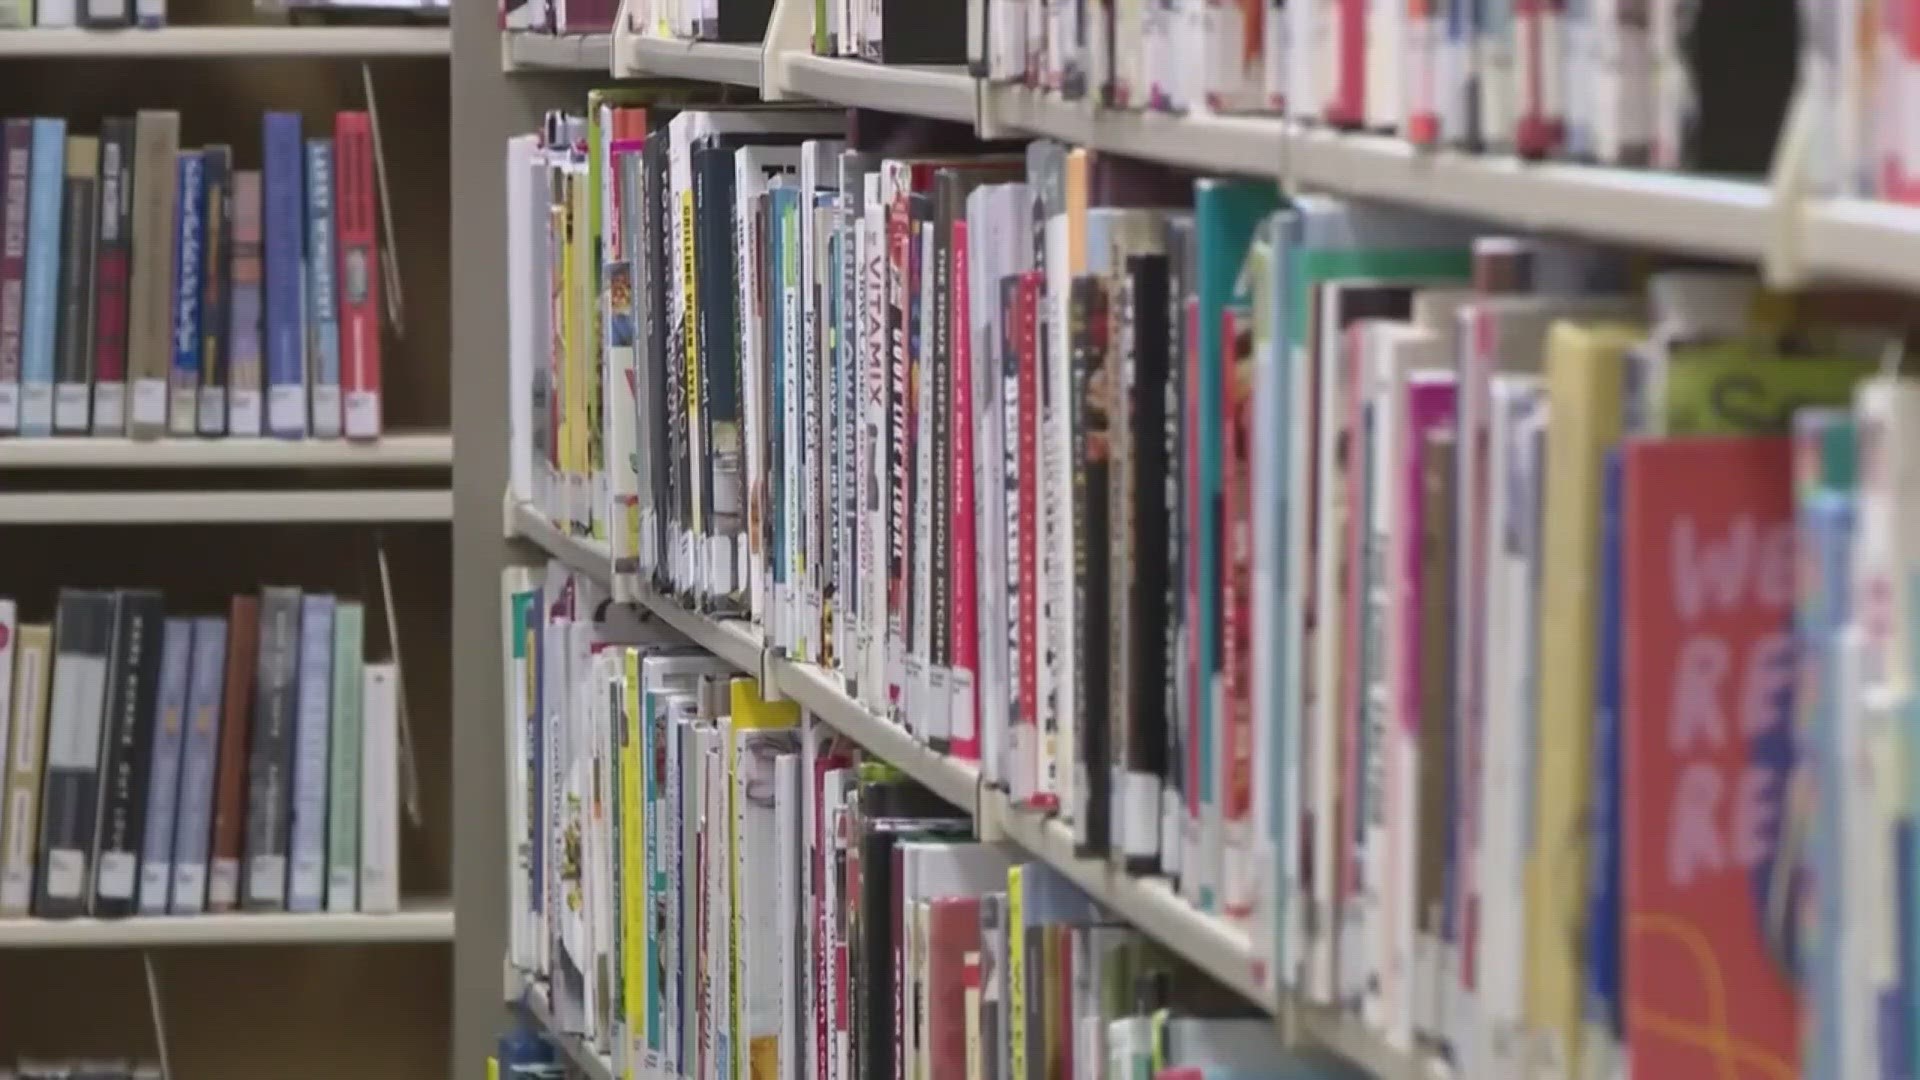 Budget committee members said they wanted to see what books the library wants before approving the money, something state library officials say is unusual.